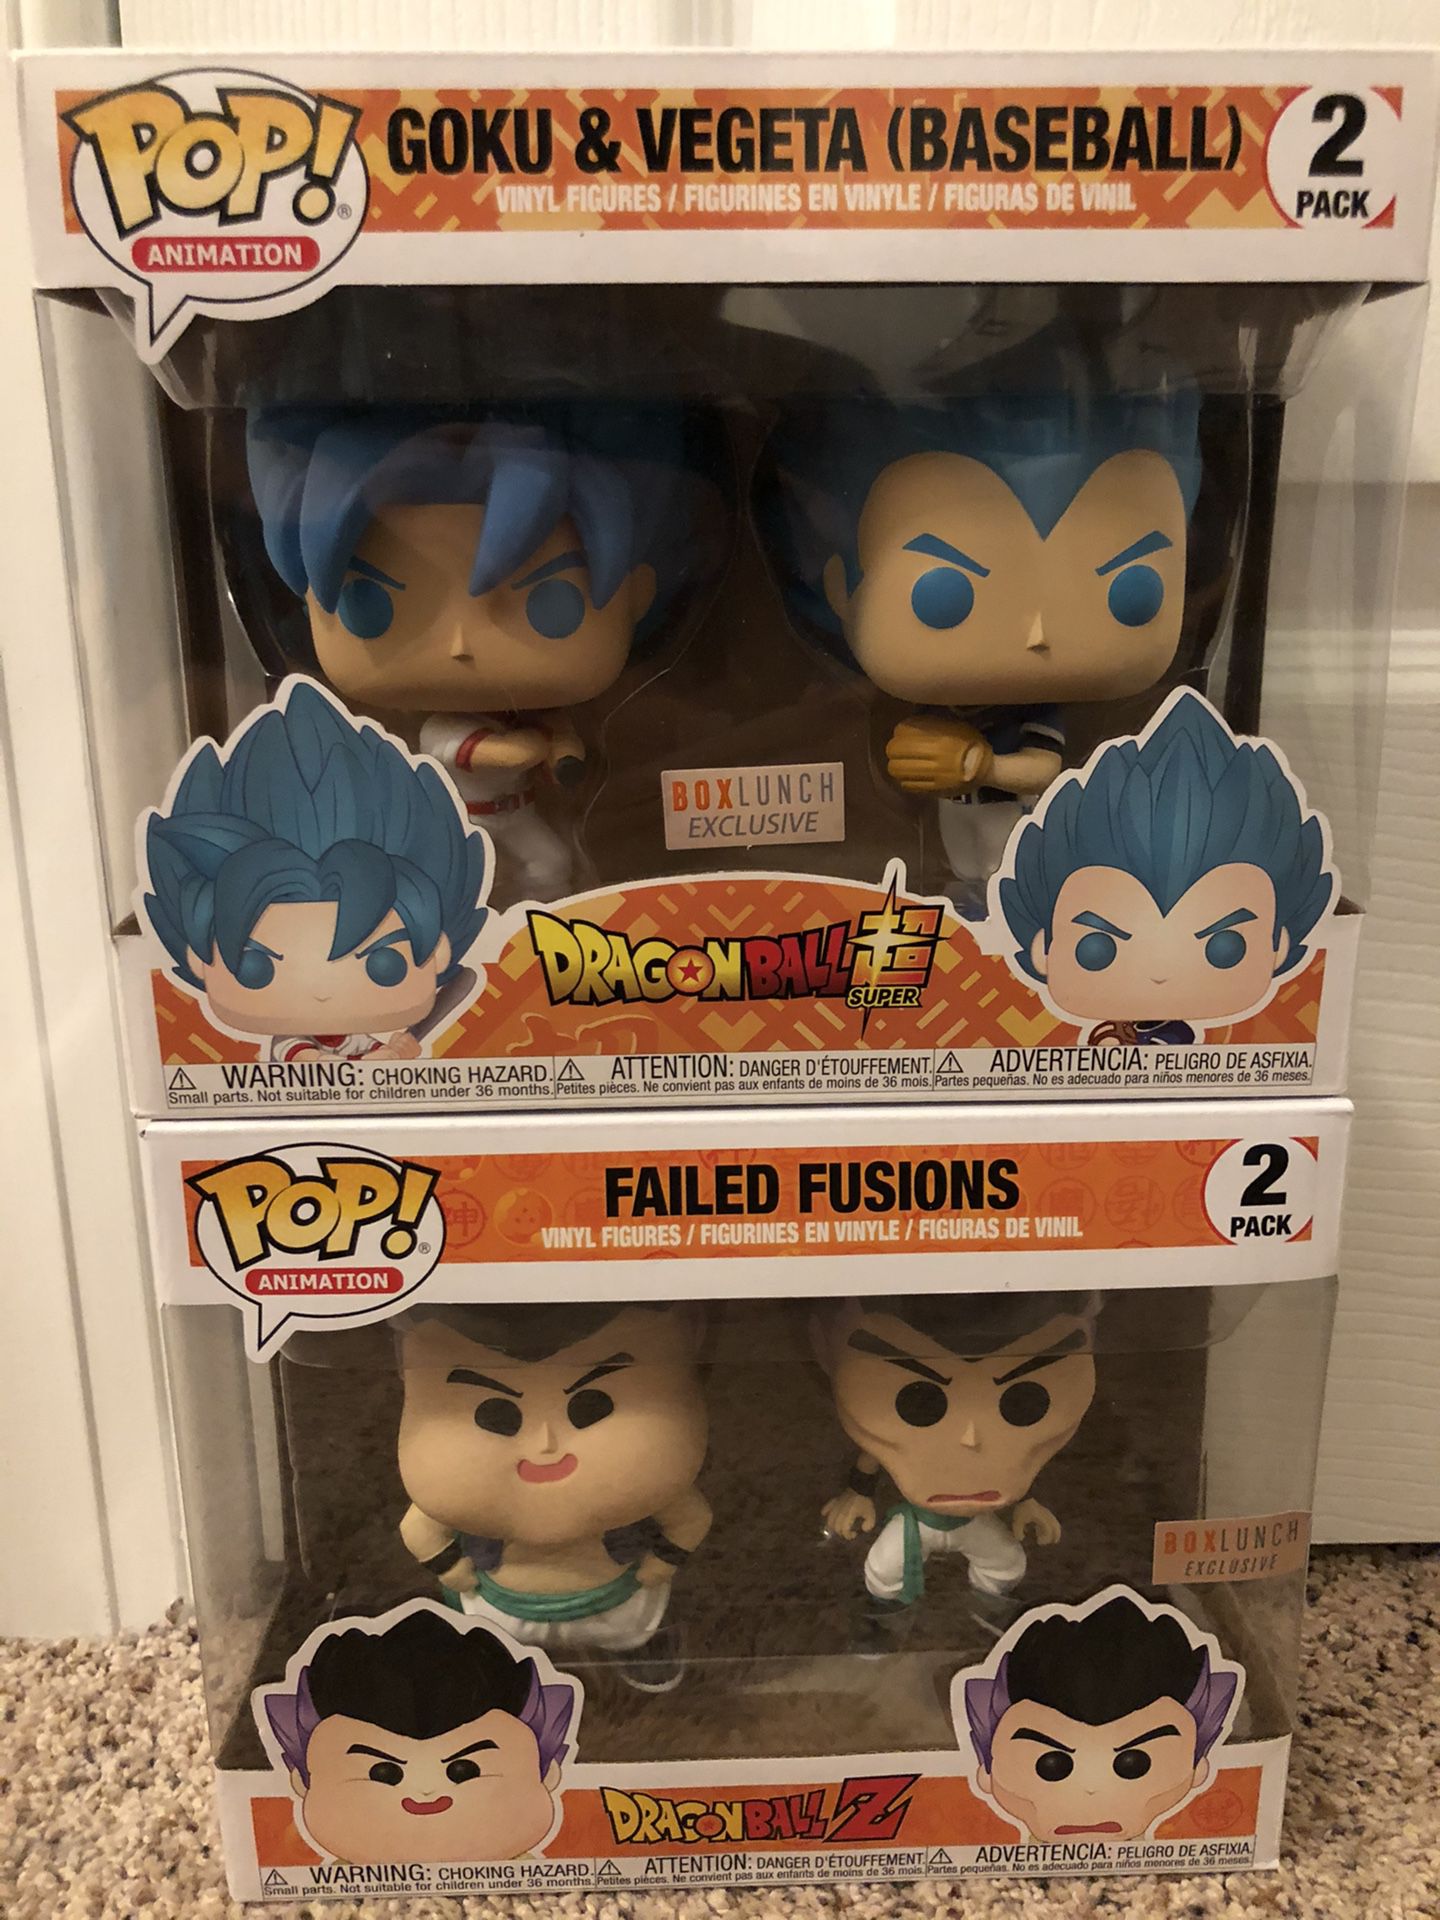 Funko Pop Vinyl - Box Lunch Exclusive - Goku and Vegeta (Baseball) and Failed Fusions